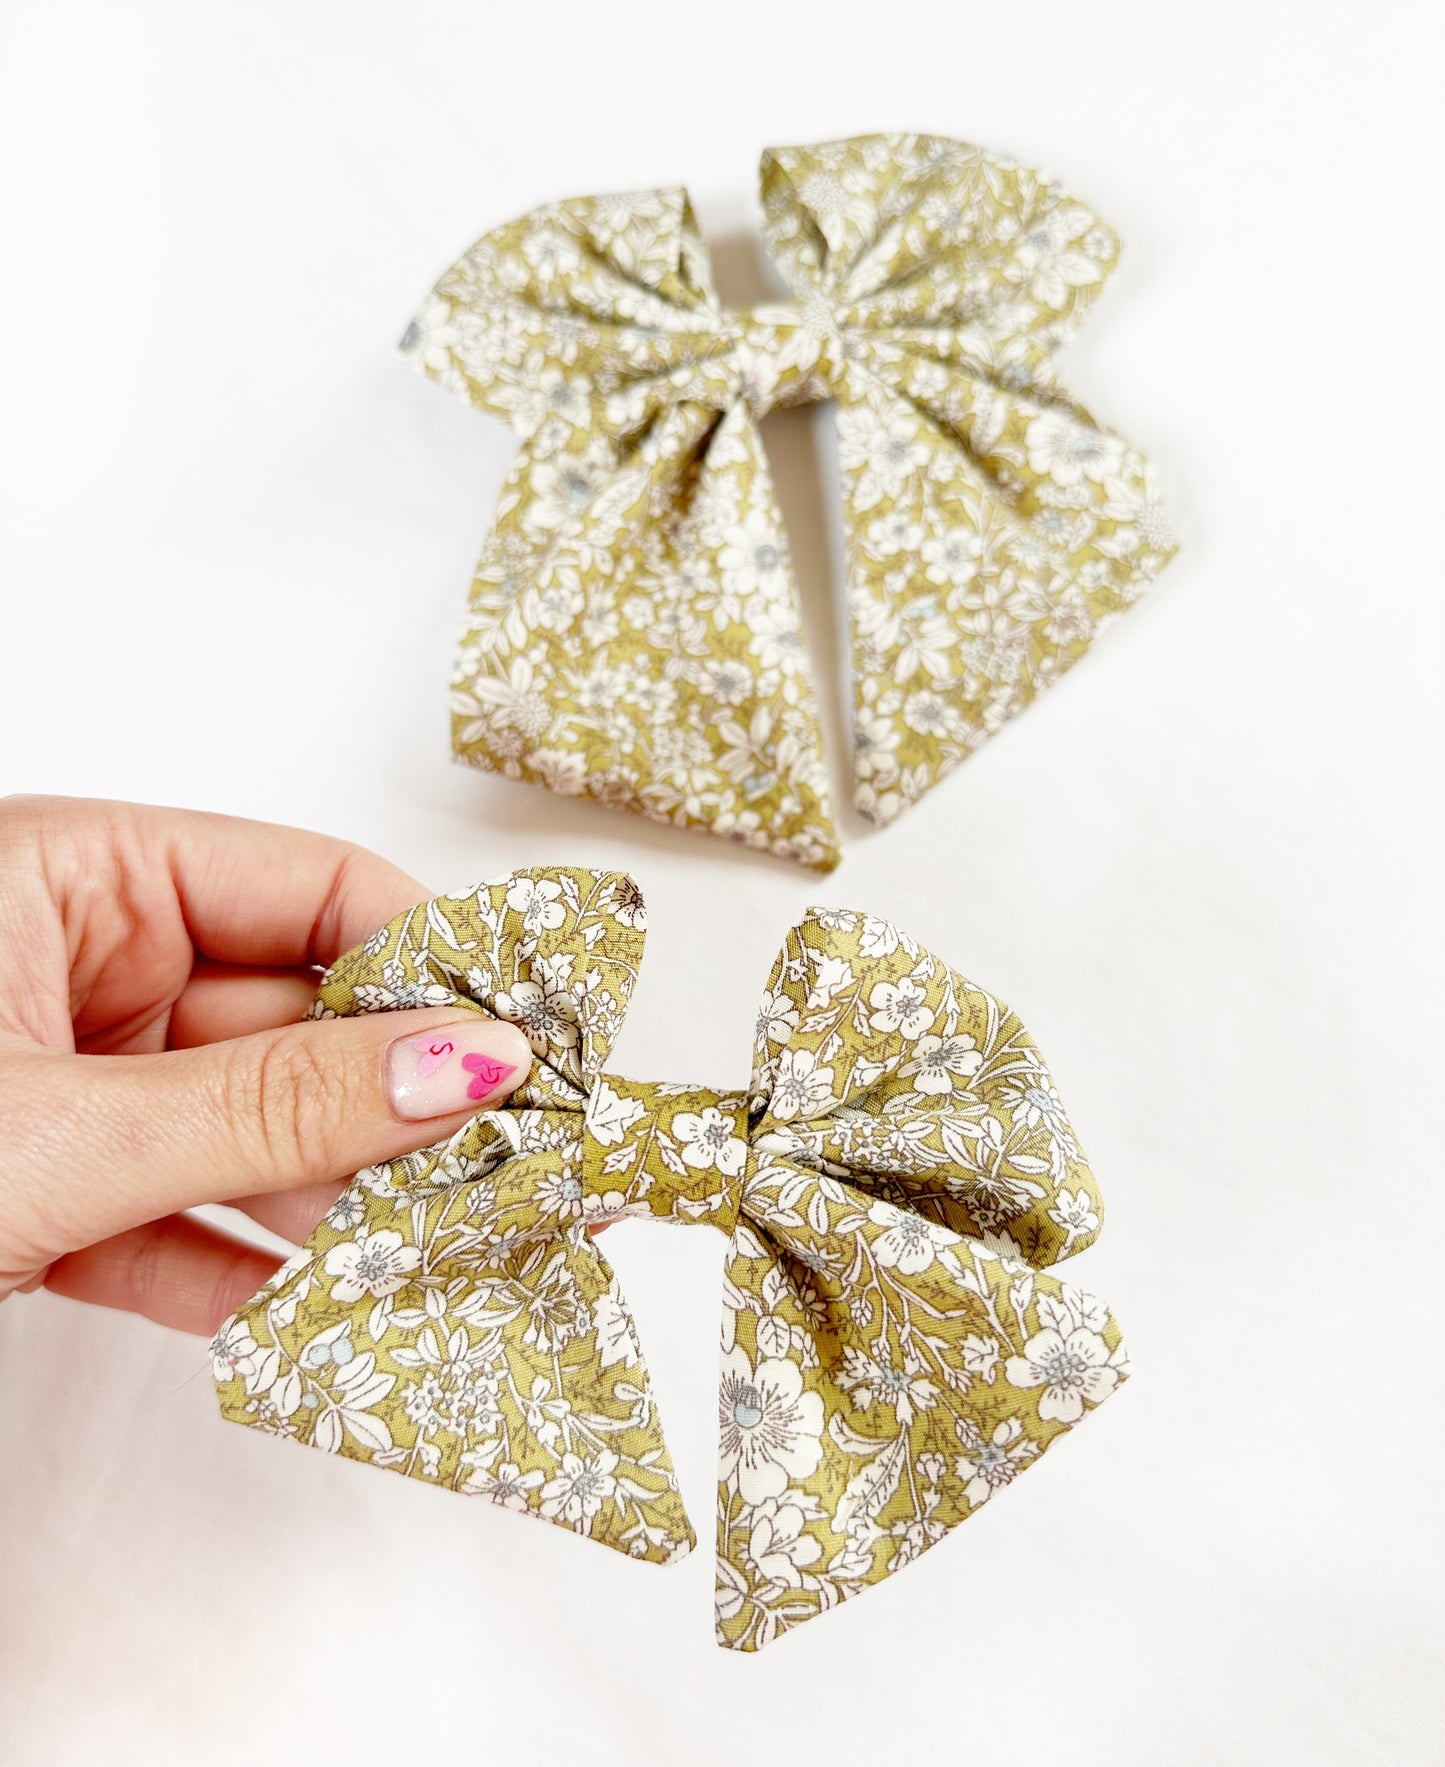 Hair Bow gift set in green meadow floral